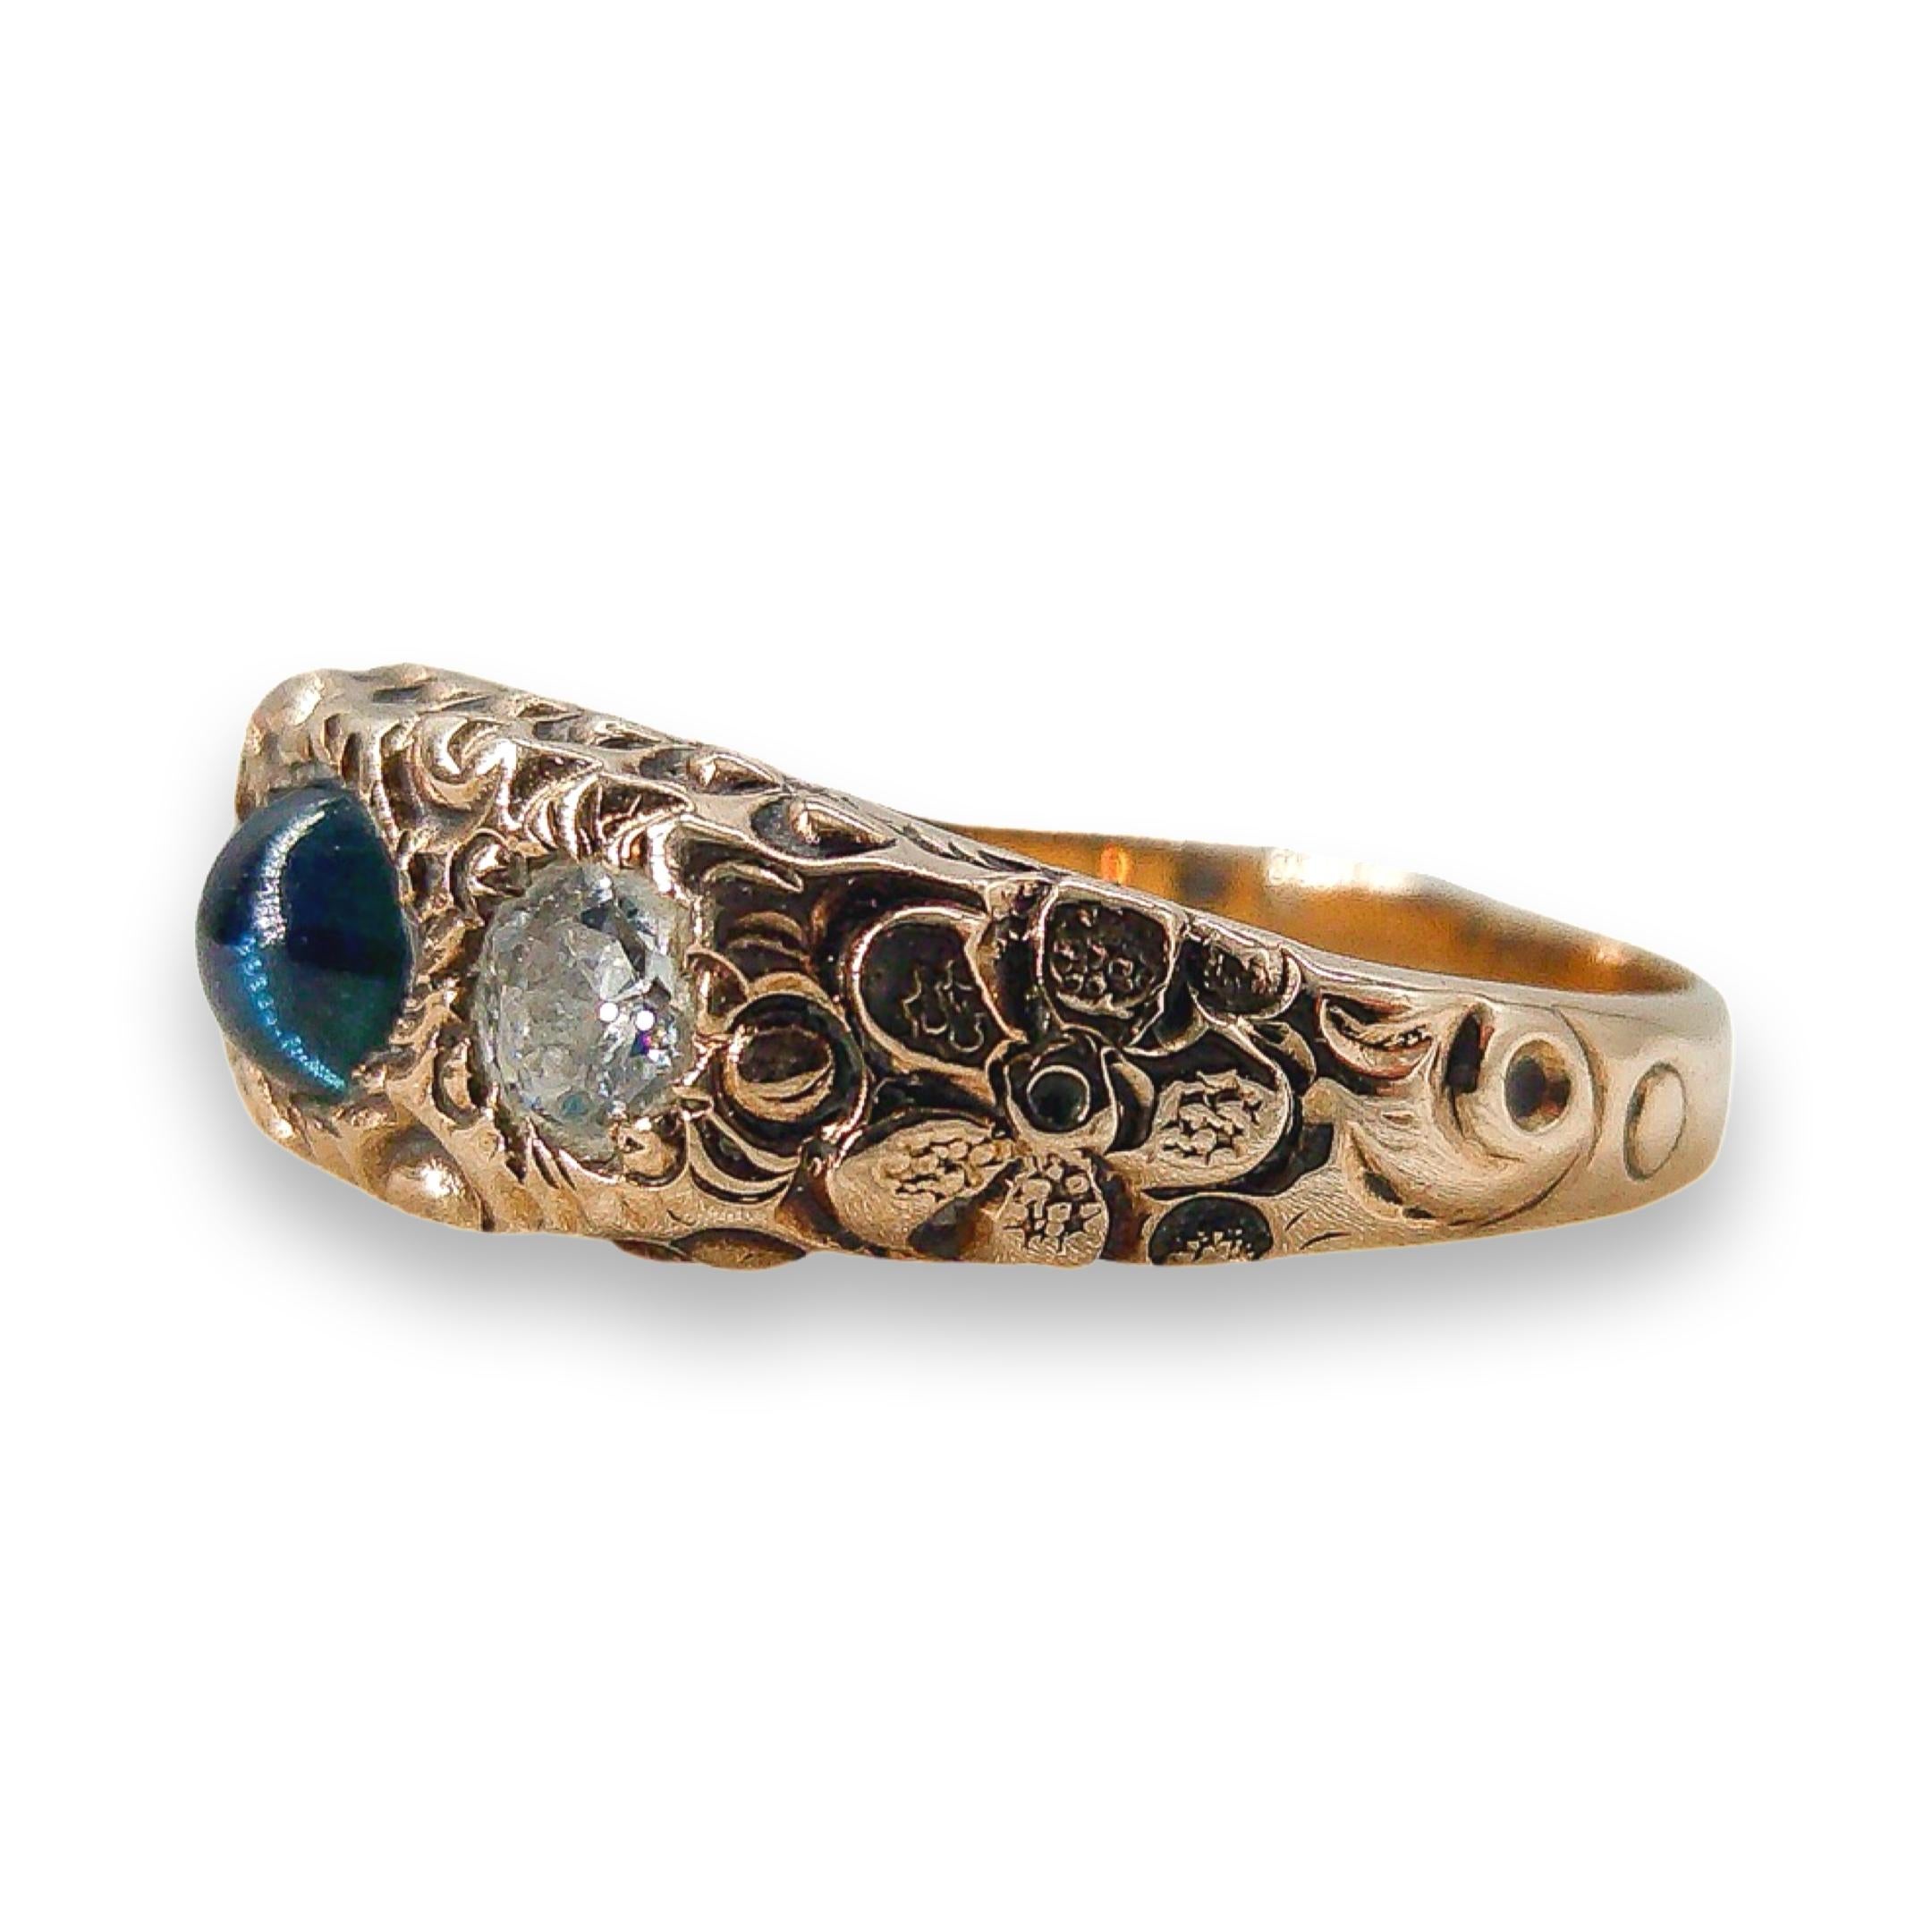 Experience elegance and enchantment with our extraordinary Victorian Diamond and Sapphire Ring. Set in resplendent 10k gold, the band itself is a canvas for the most intricate and enchanting filigree work. Delicate flowers, frozen in time, grace the